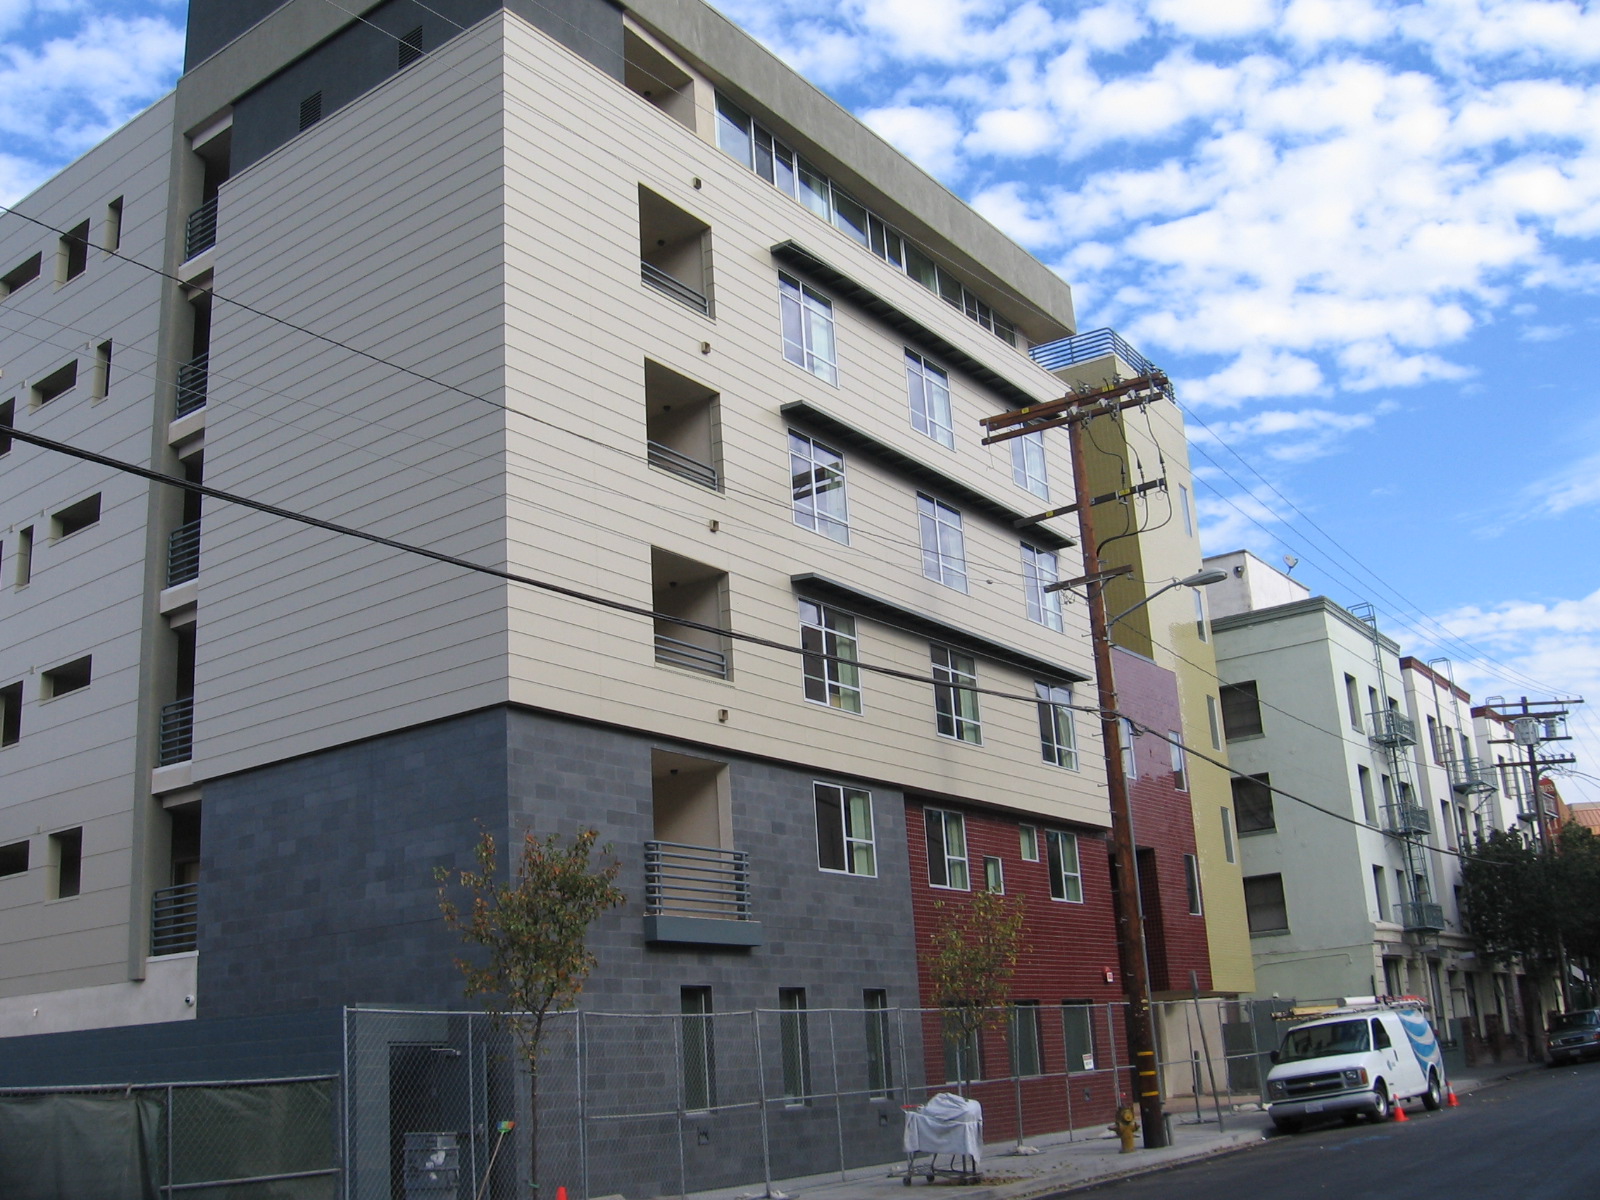 Photo of the Street view of a five story building in gold, brown and gray colors with windows